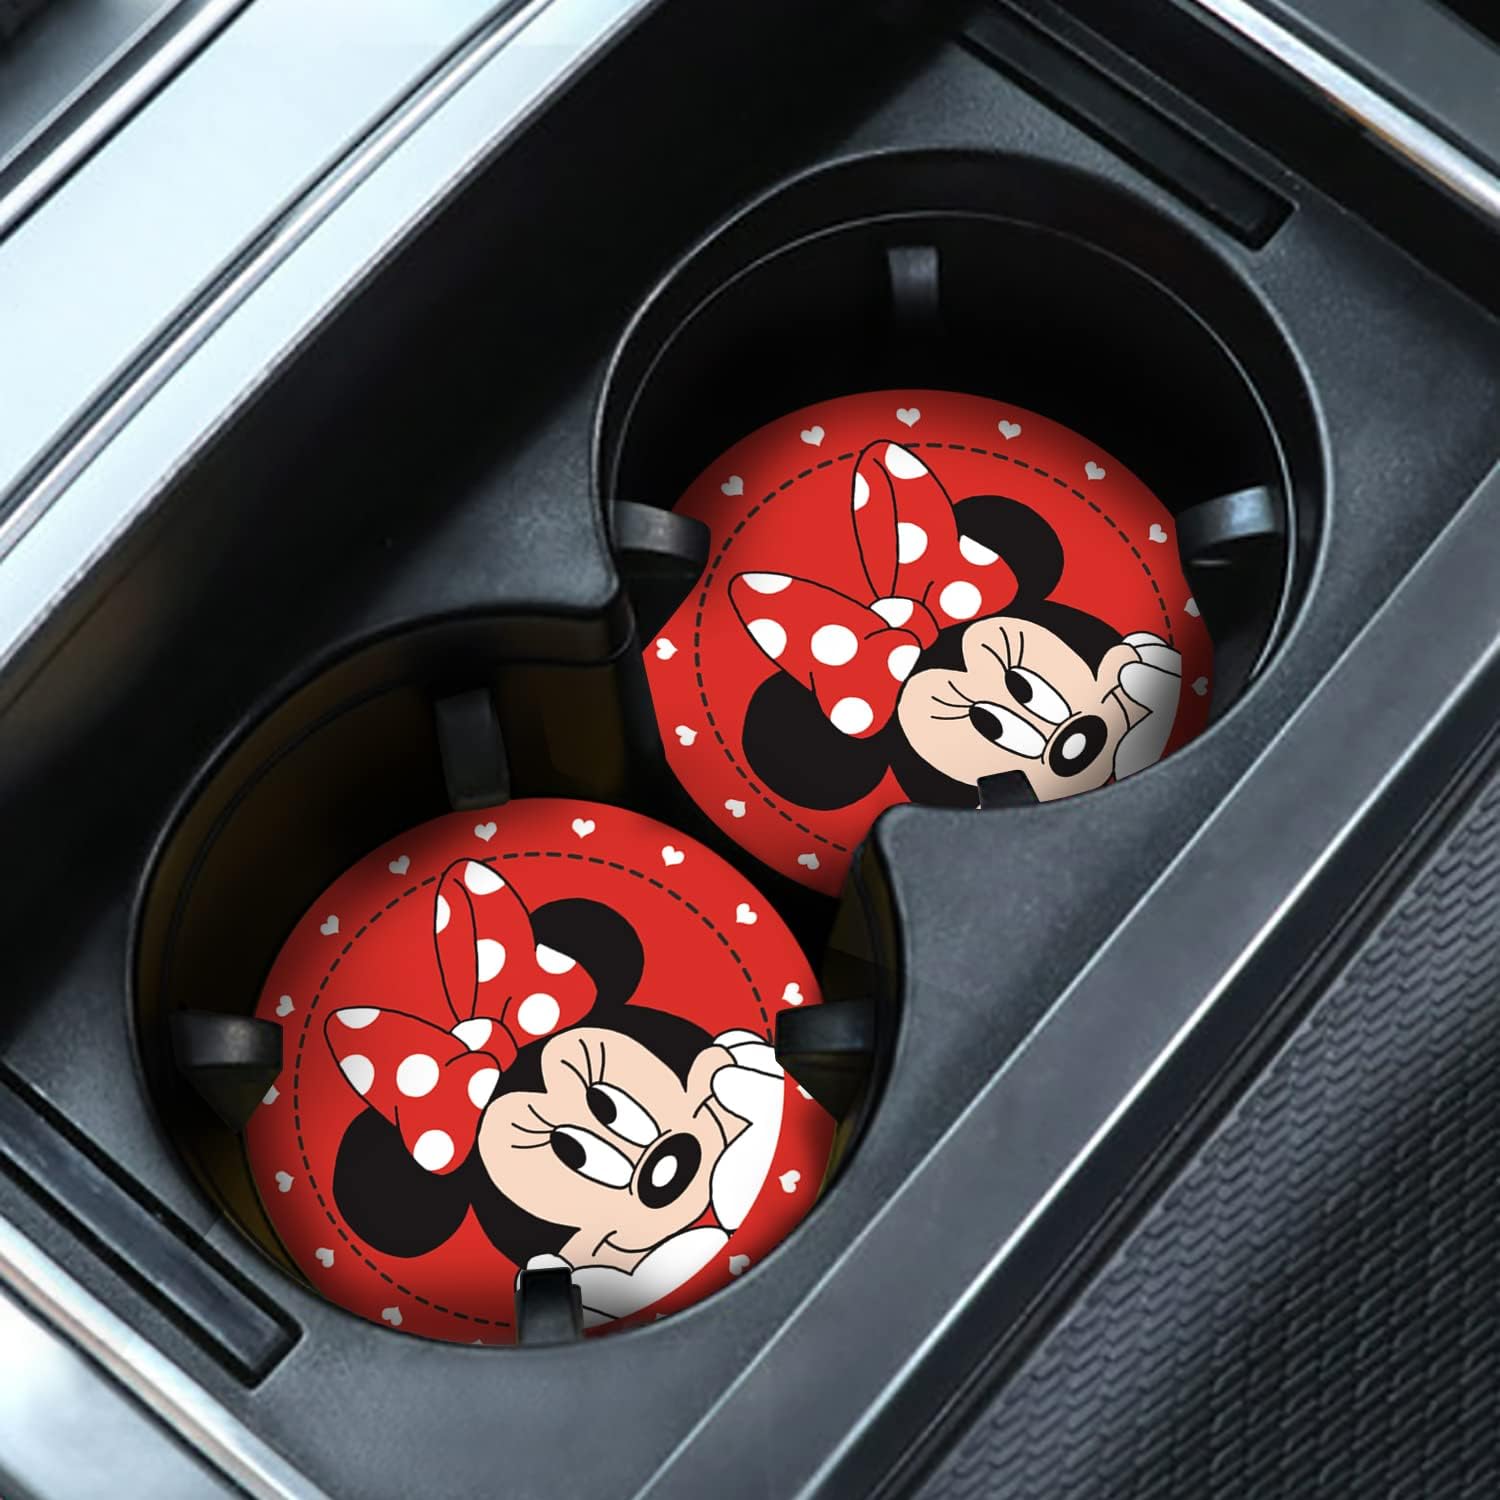 for Mickey Car Cup Holder Coasters,Cartoon Fans Cup Coasters for Car Cup  Holder,Mickey Mouse Car Cup Holder Insert,Souvenir/Gifts for Mickey